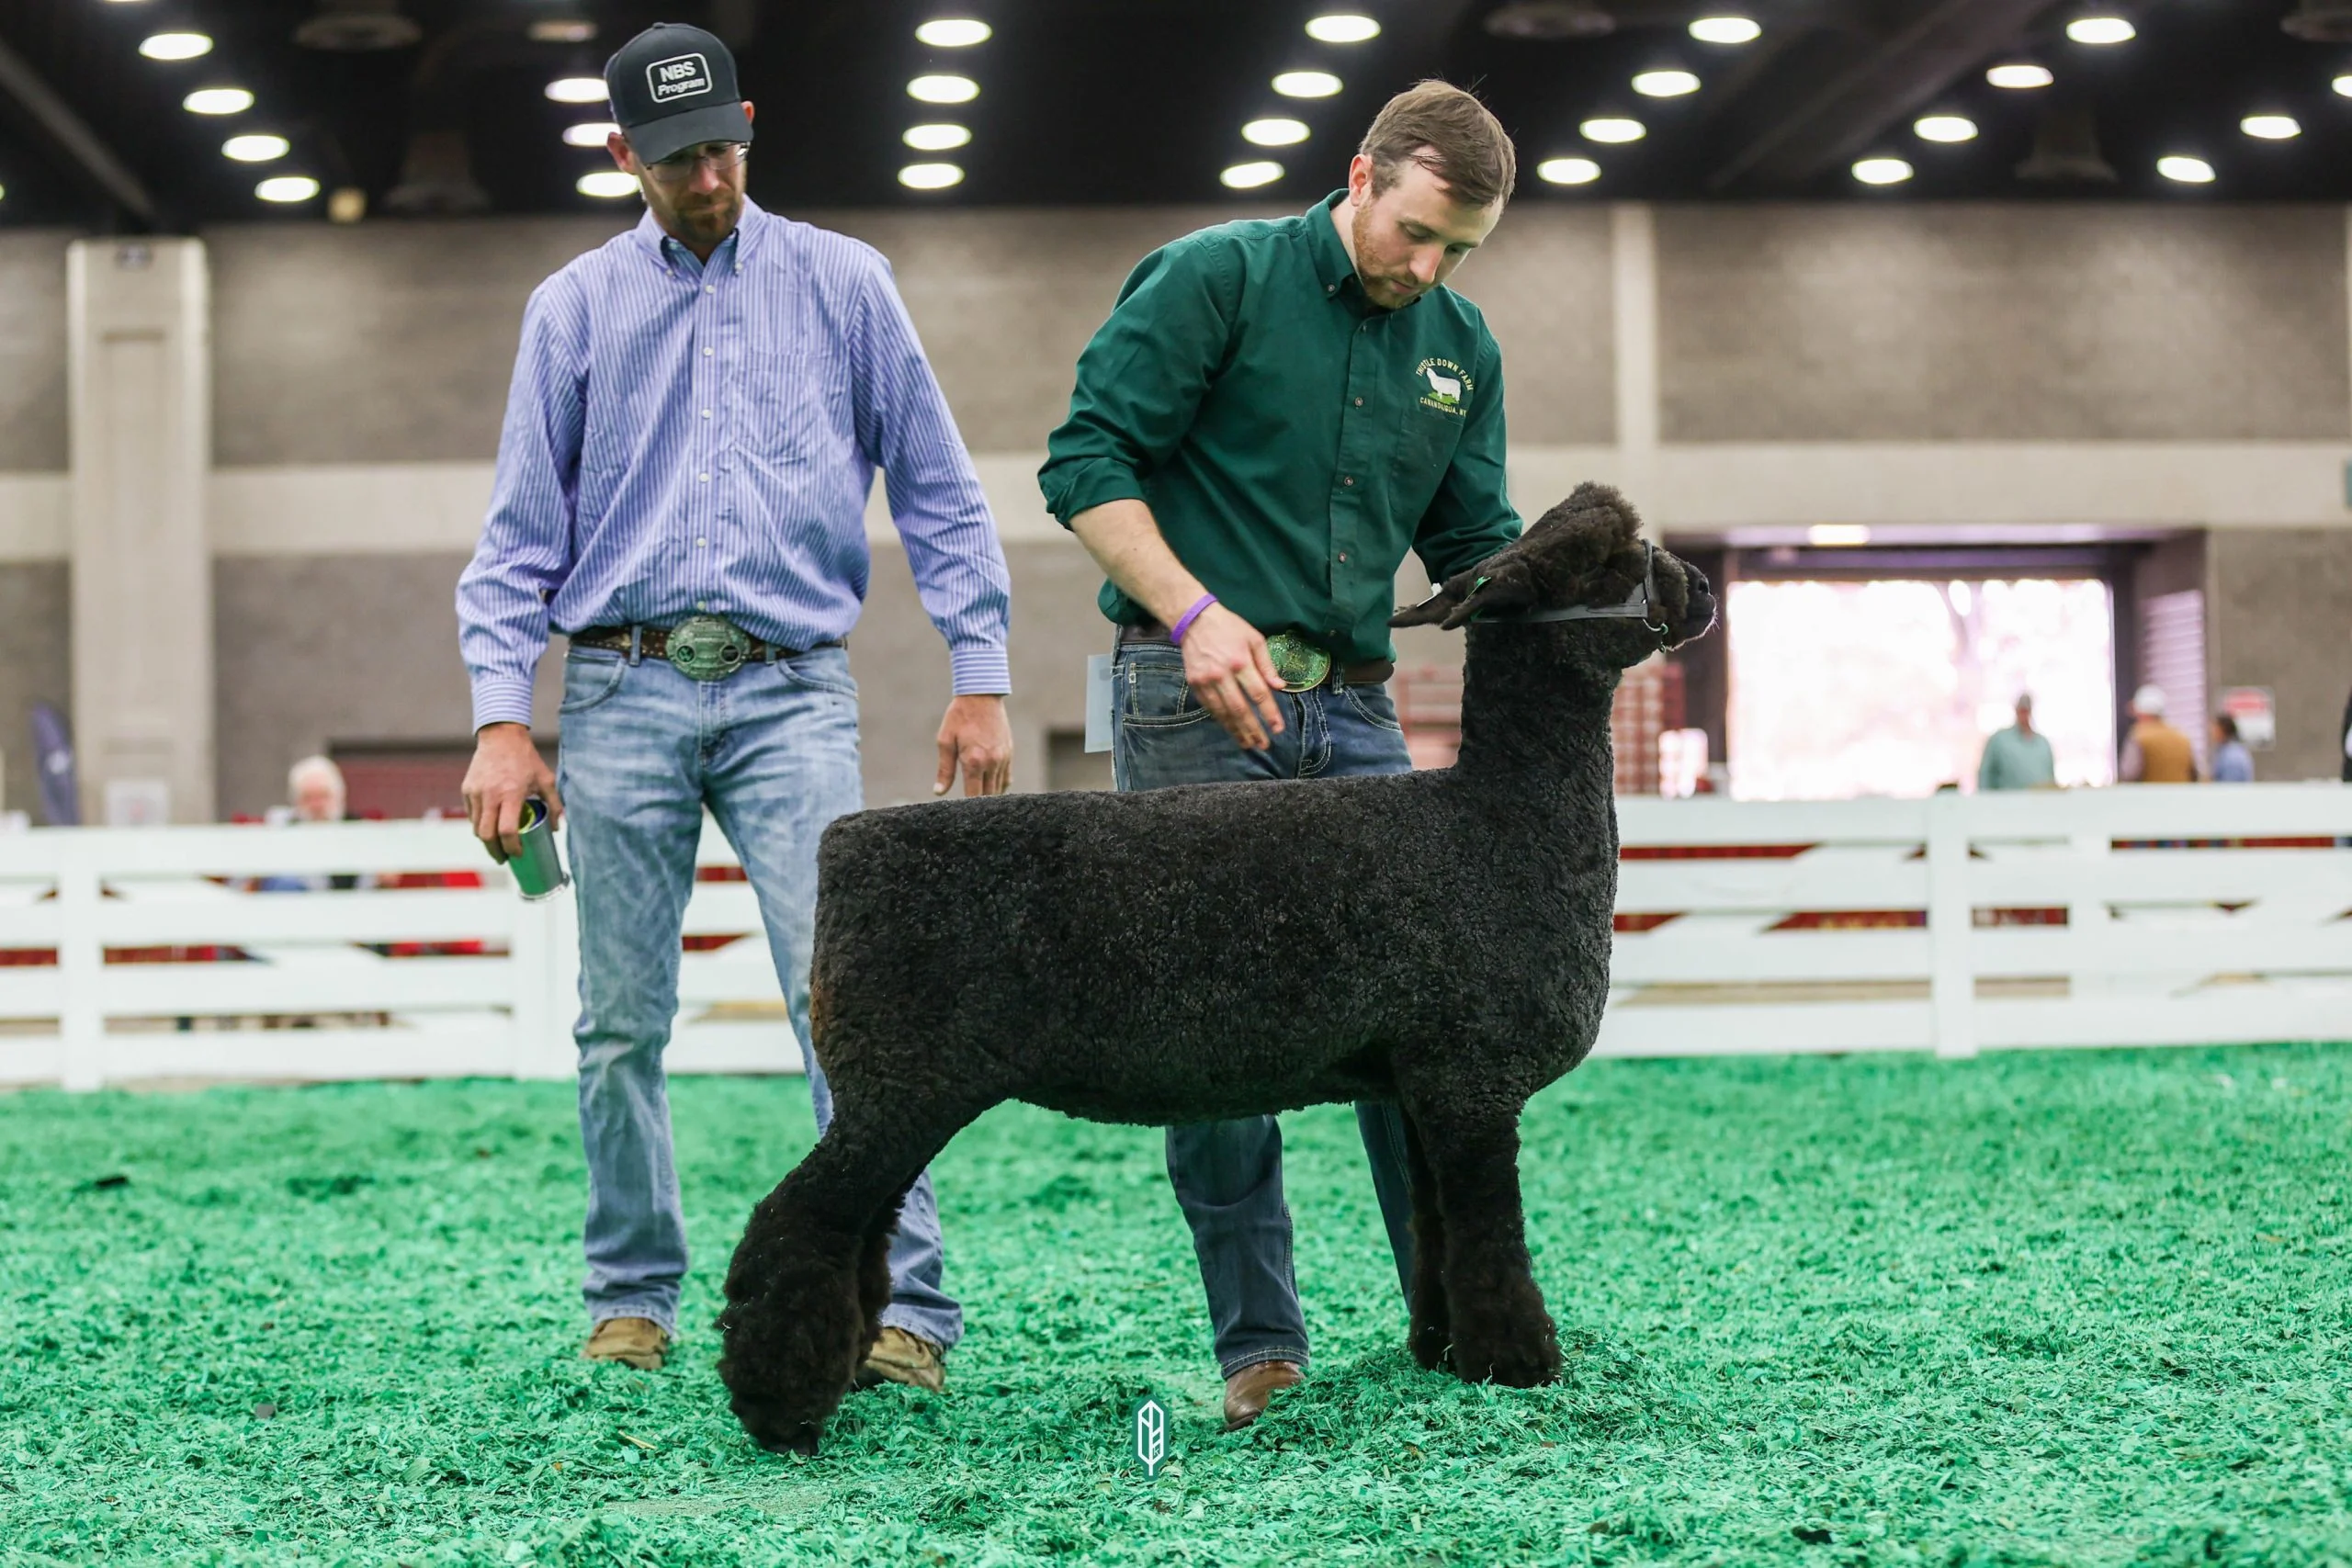 2023 National Natural Colored Romney Show at NAILE
1st place spring ewe lamb exhibited by Ethan Kennedy of Thistle Down Farm